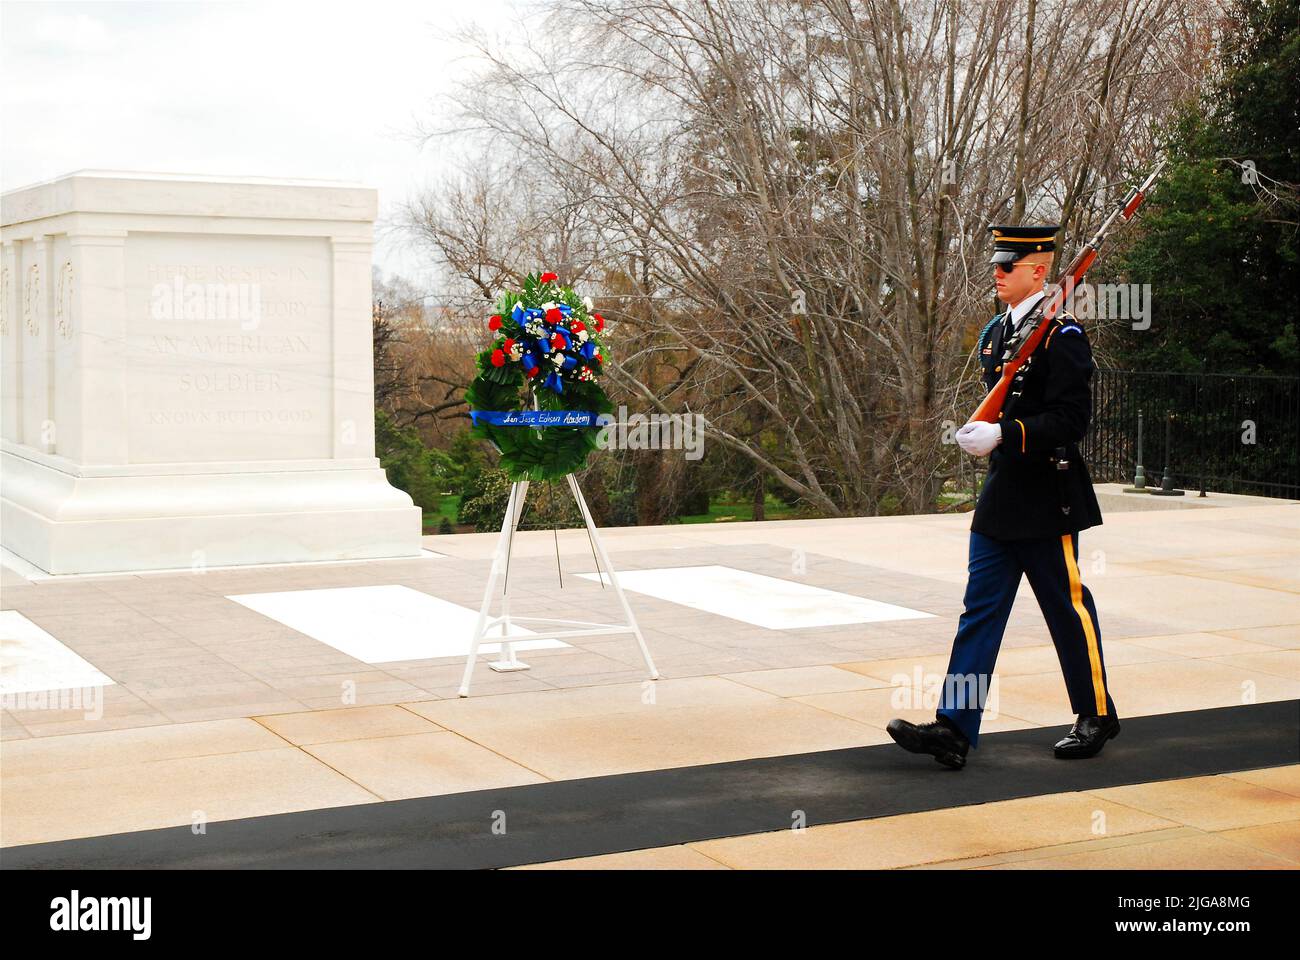 An honor guard paces in front of the Tomb of the Unknow Soldier, providing a ceremonial guard at the Arlington National Cemetery near Washington, DC Stock Photo